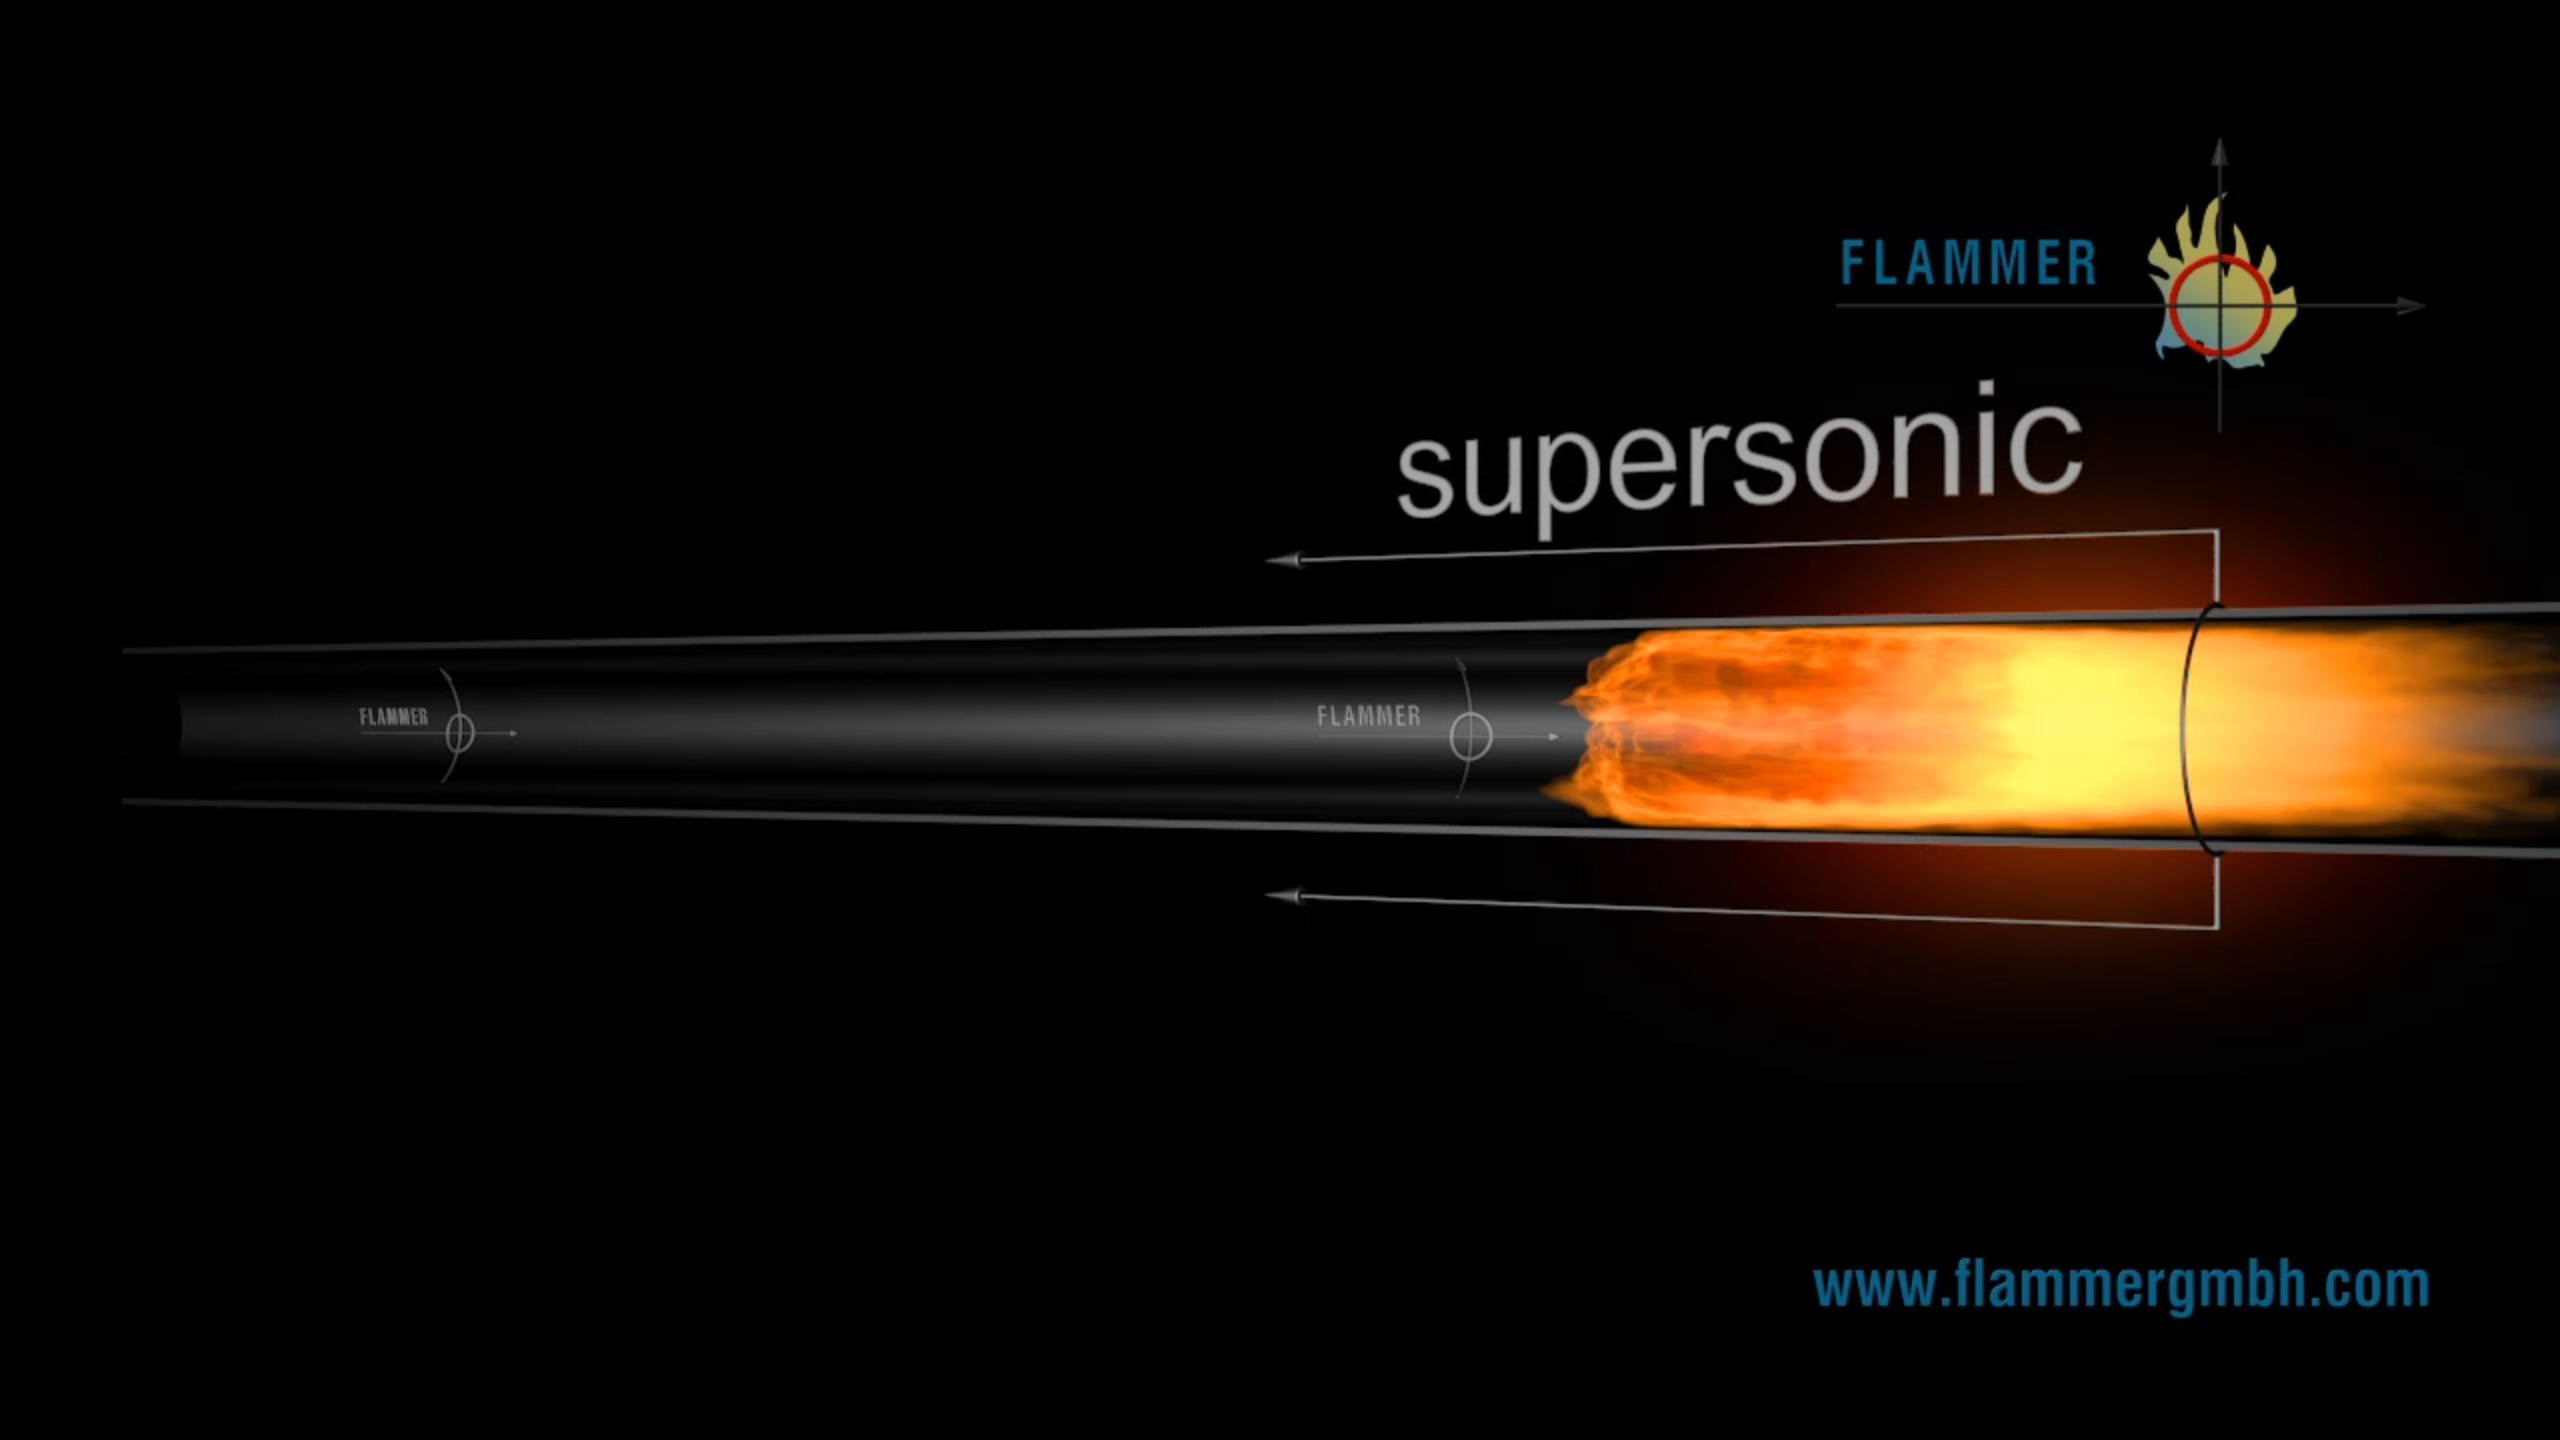 Speed of Flame at Deflagration and Detonation.